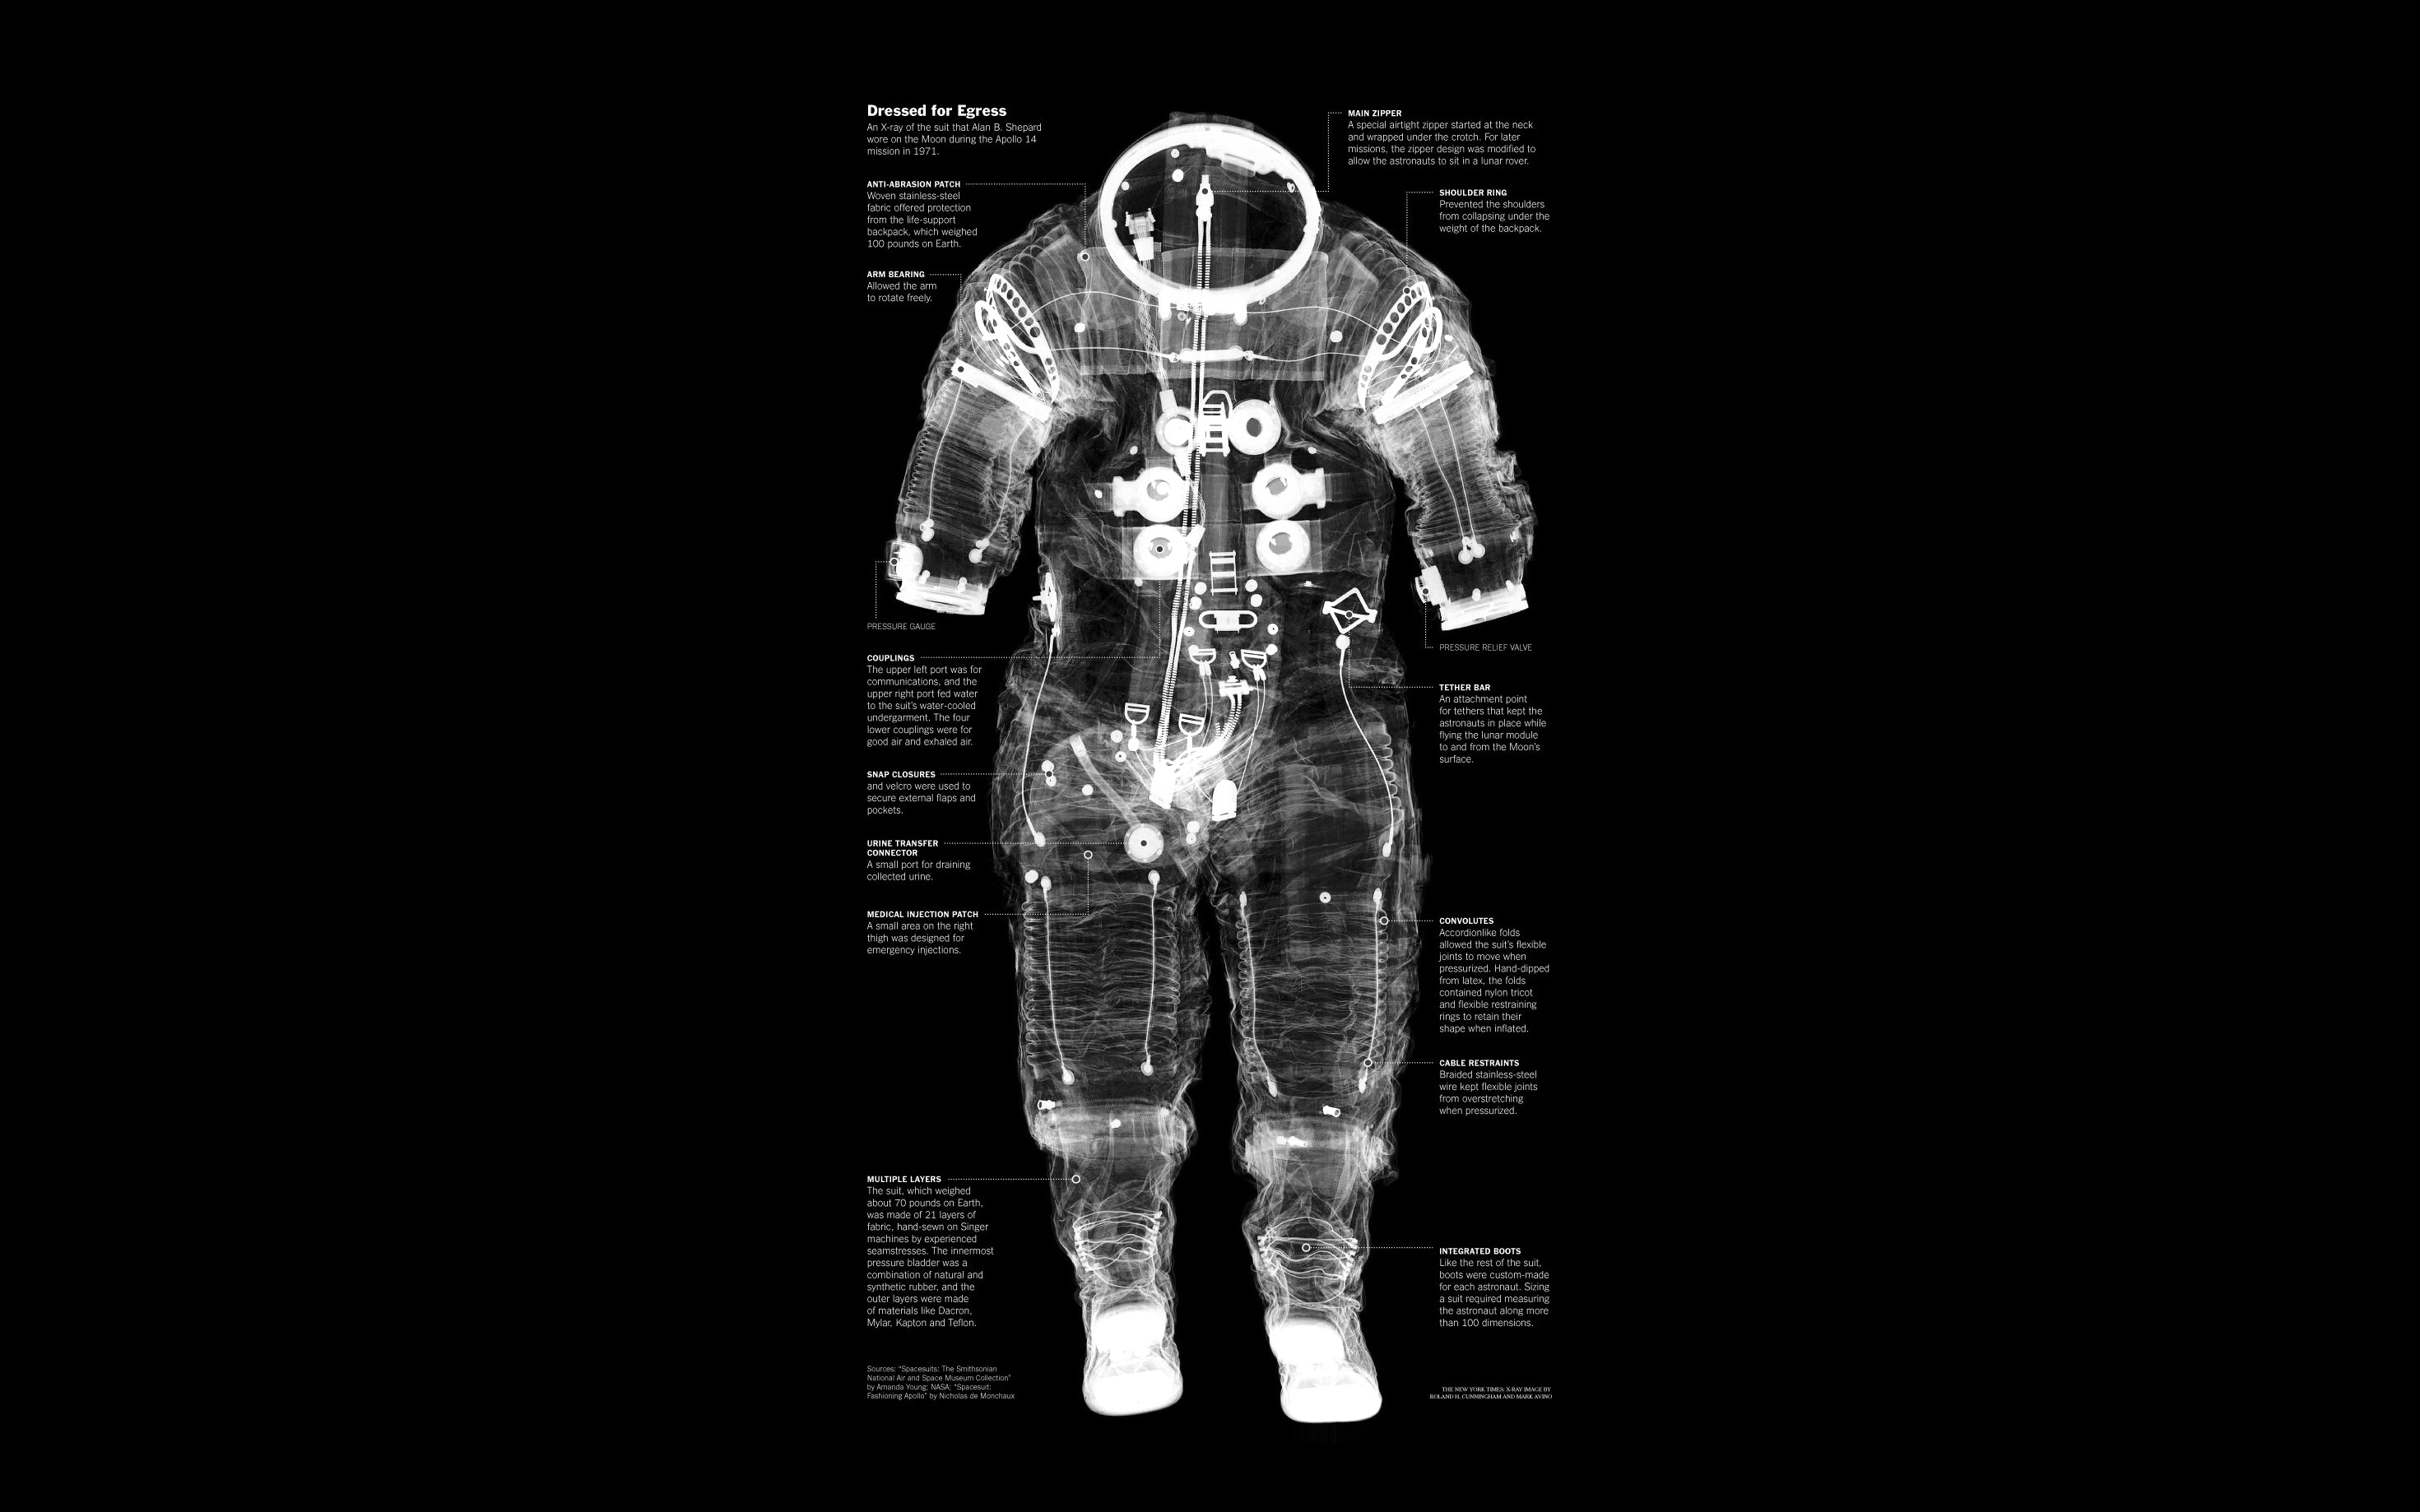 outer space, stars, NASA, Xray, space suits, information - desktop wallpaper